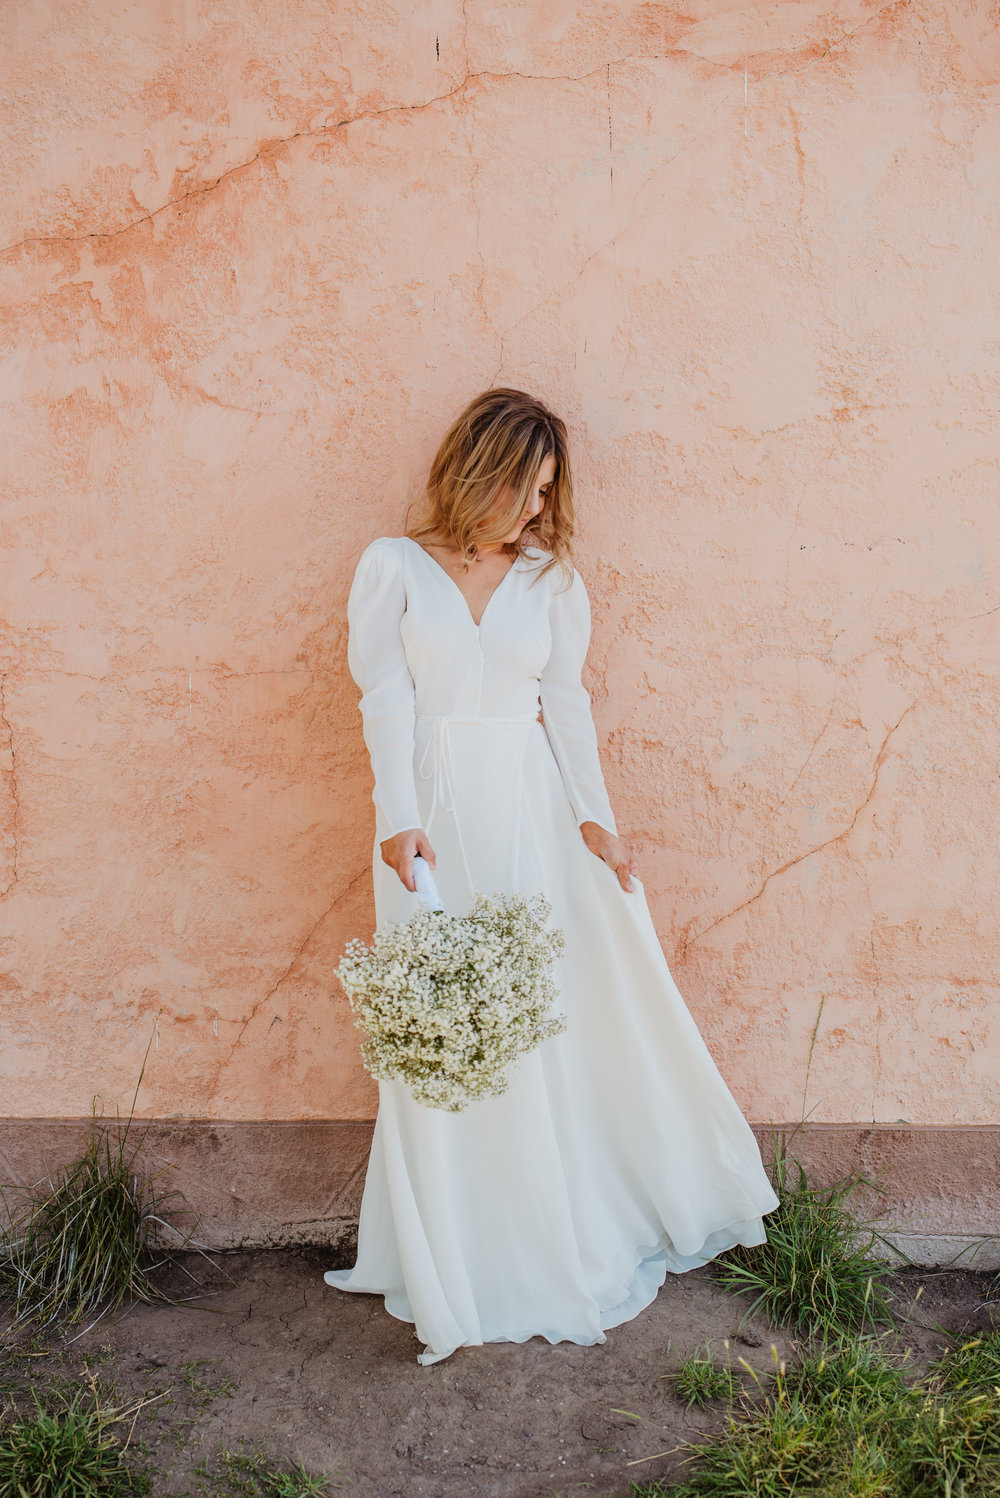 bride looking down at her simple white wedding gown as she holds her wedding bouquet and smiles in Jackson Hole Jocilyn Bennett Photography | How to Plan an Elopement | Why Elope | Reasons to Elope | Destination Wedding Photographer | Utah Wedding Photographer | Adventure Photographer | Destination Elopement Photographer | Traveling Photographer | Grand Teton Elopement | Grand Teton Photographer | National Park Weddings | Mountain elopement |